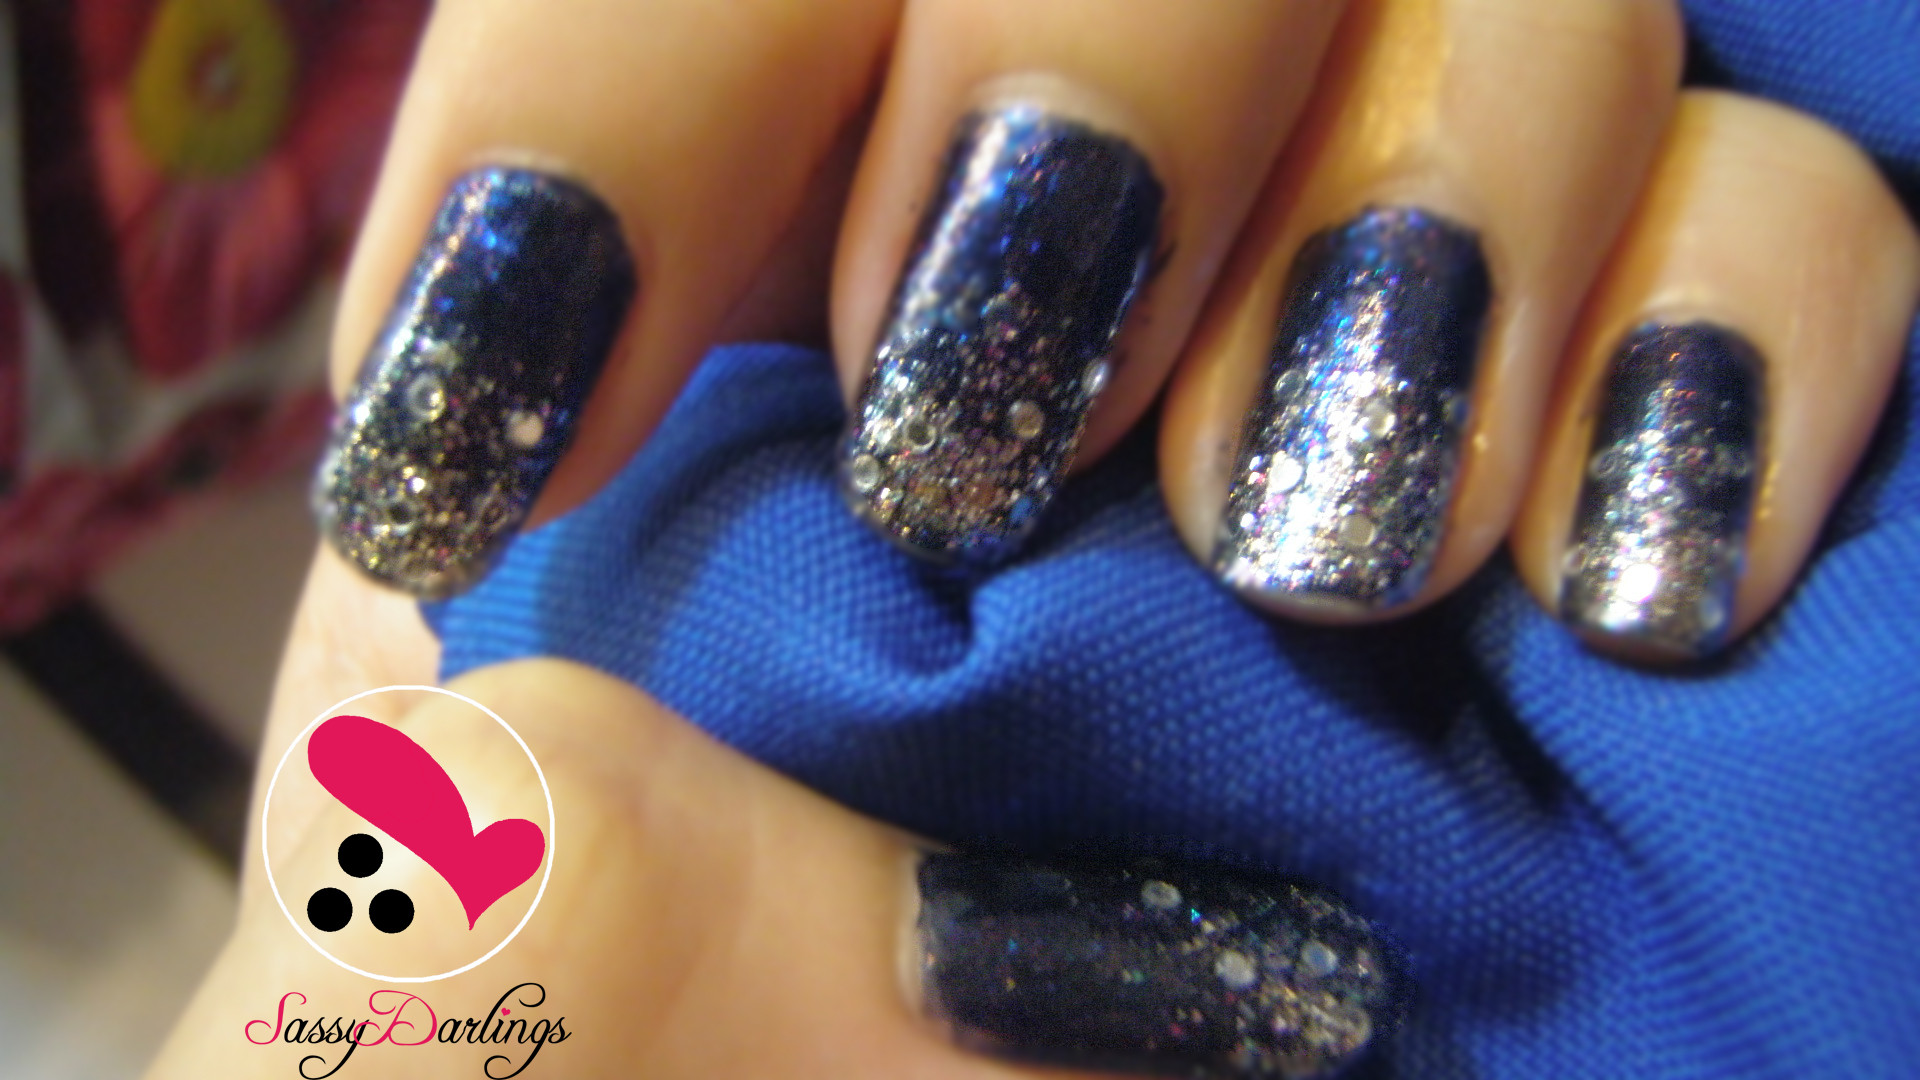 Royal Blue Glitter Nails
 Glitter Royal Blue Nails How To Remove Glitters